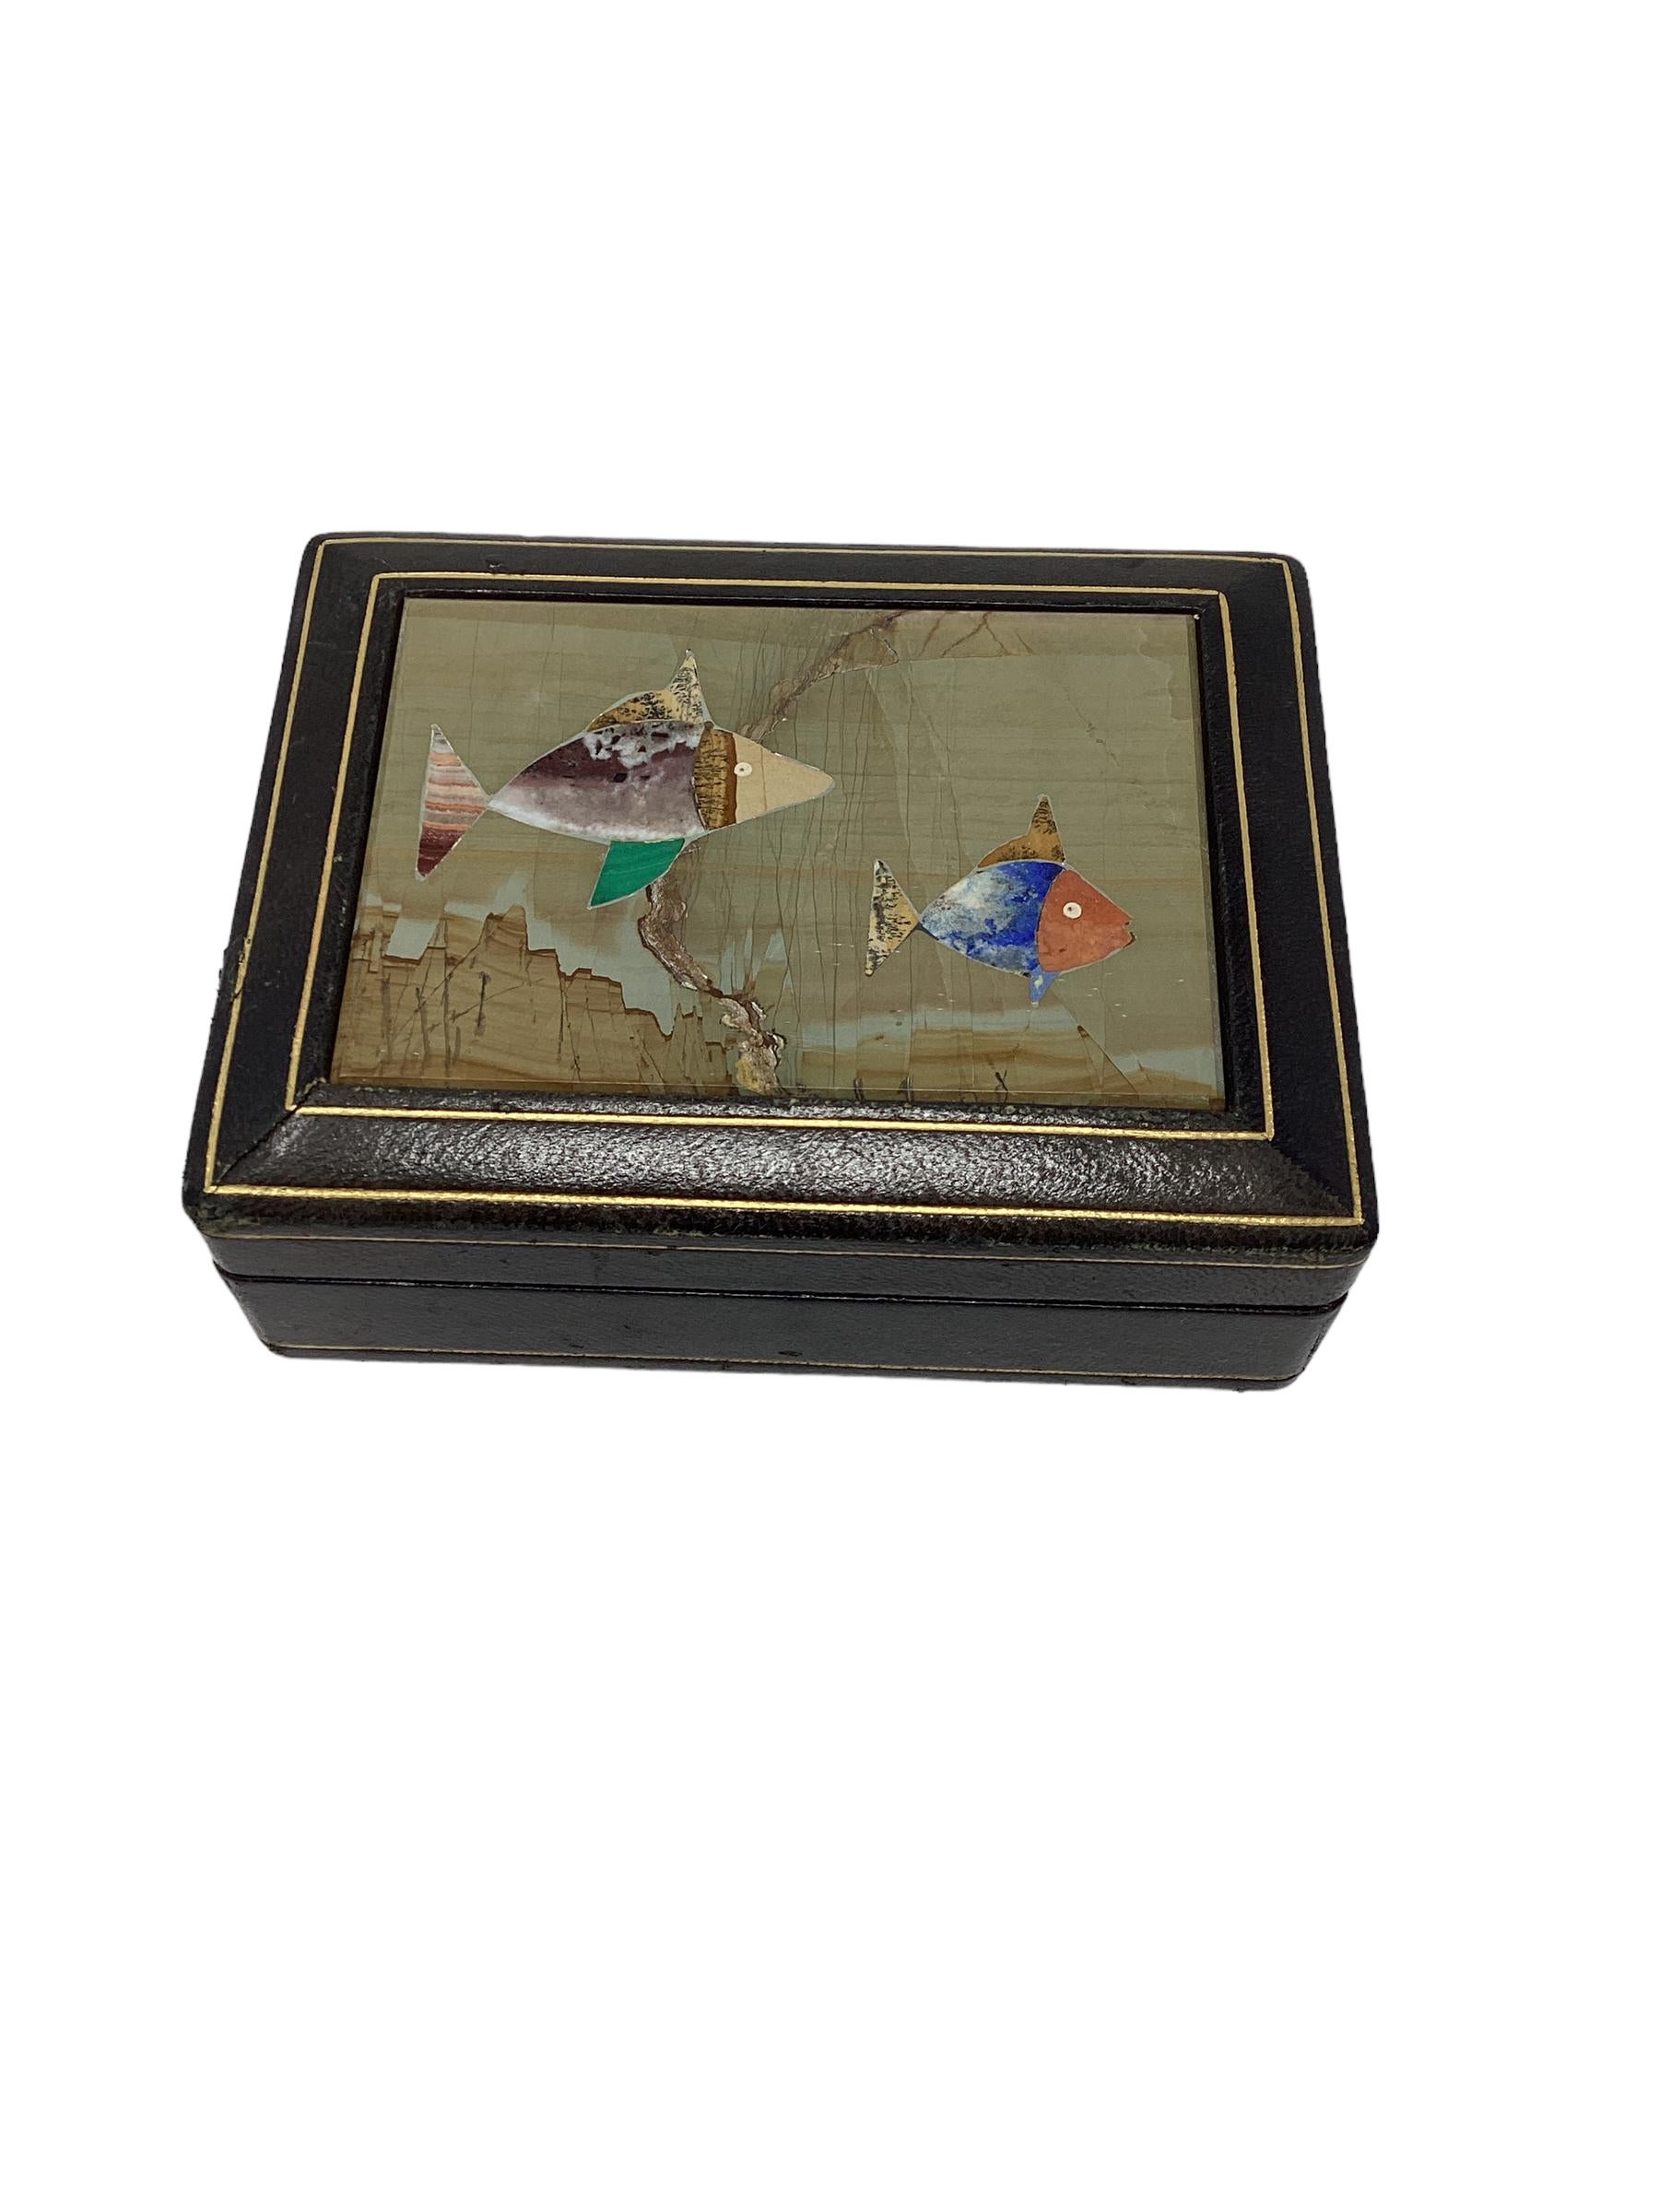 Vintage Italian leather box with pietra dura inset tile decorated with brightly colored fish. The interior is wood lined. This would have held trinkets or cigarettes. Stamped on the bottom “Made in Italy “